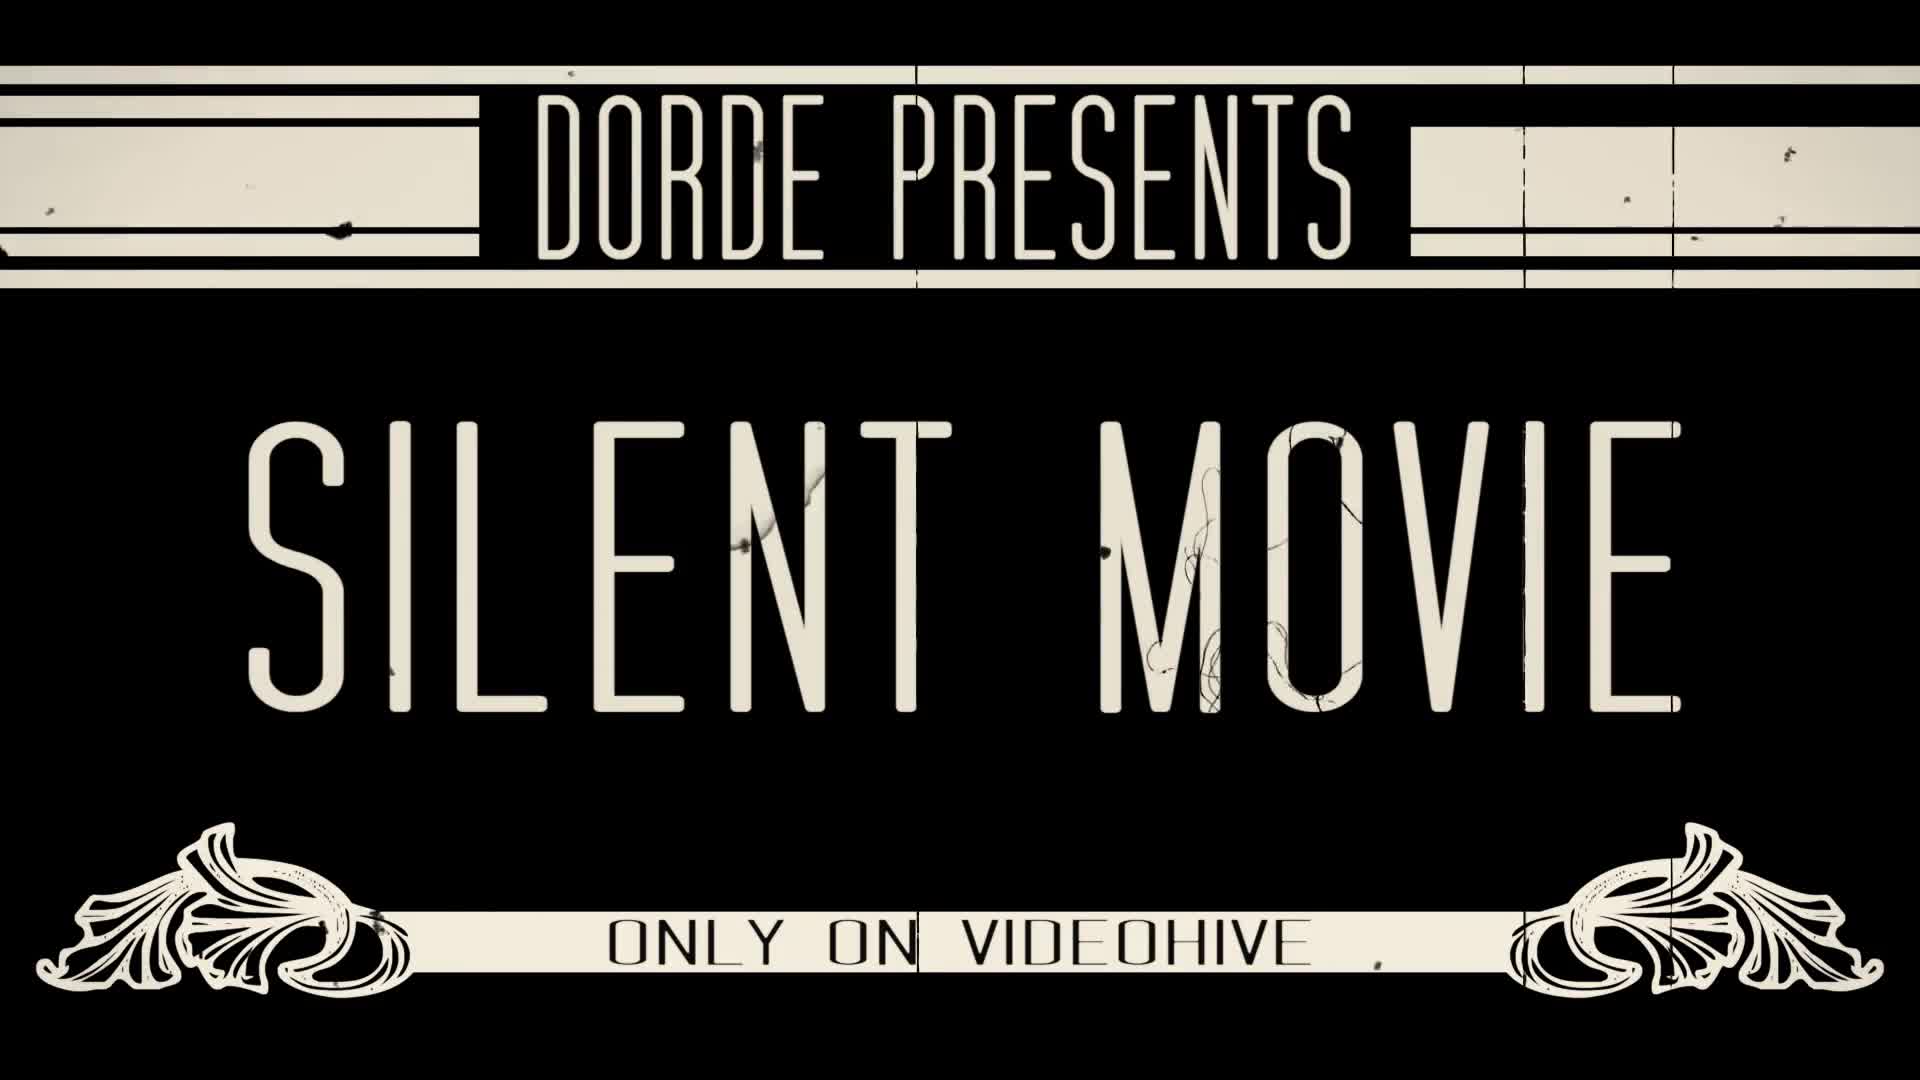 Silent Movie - Download Videohive 22913212